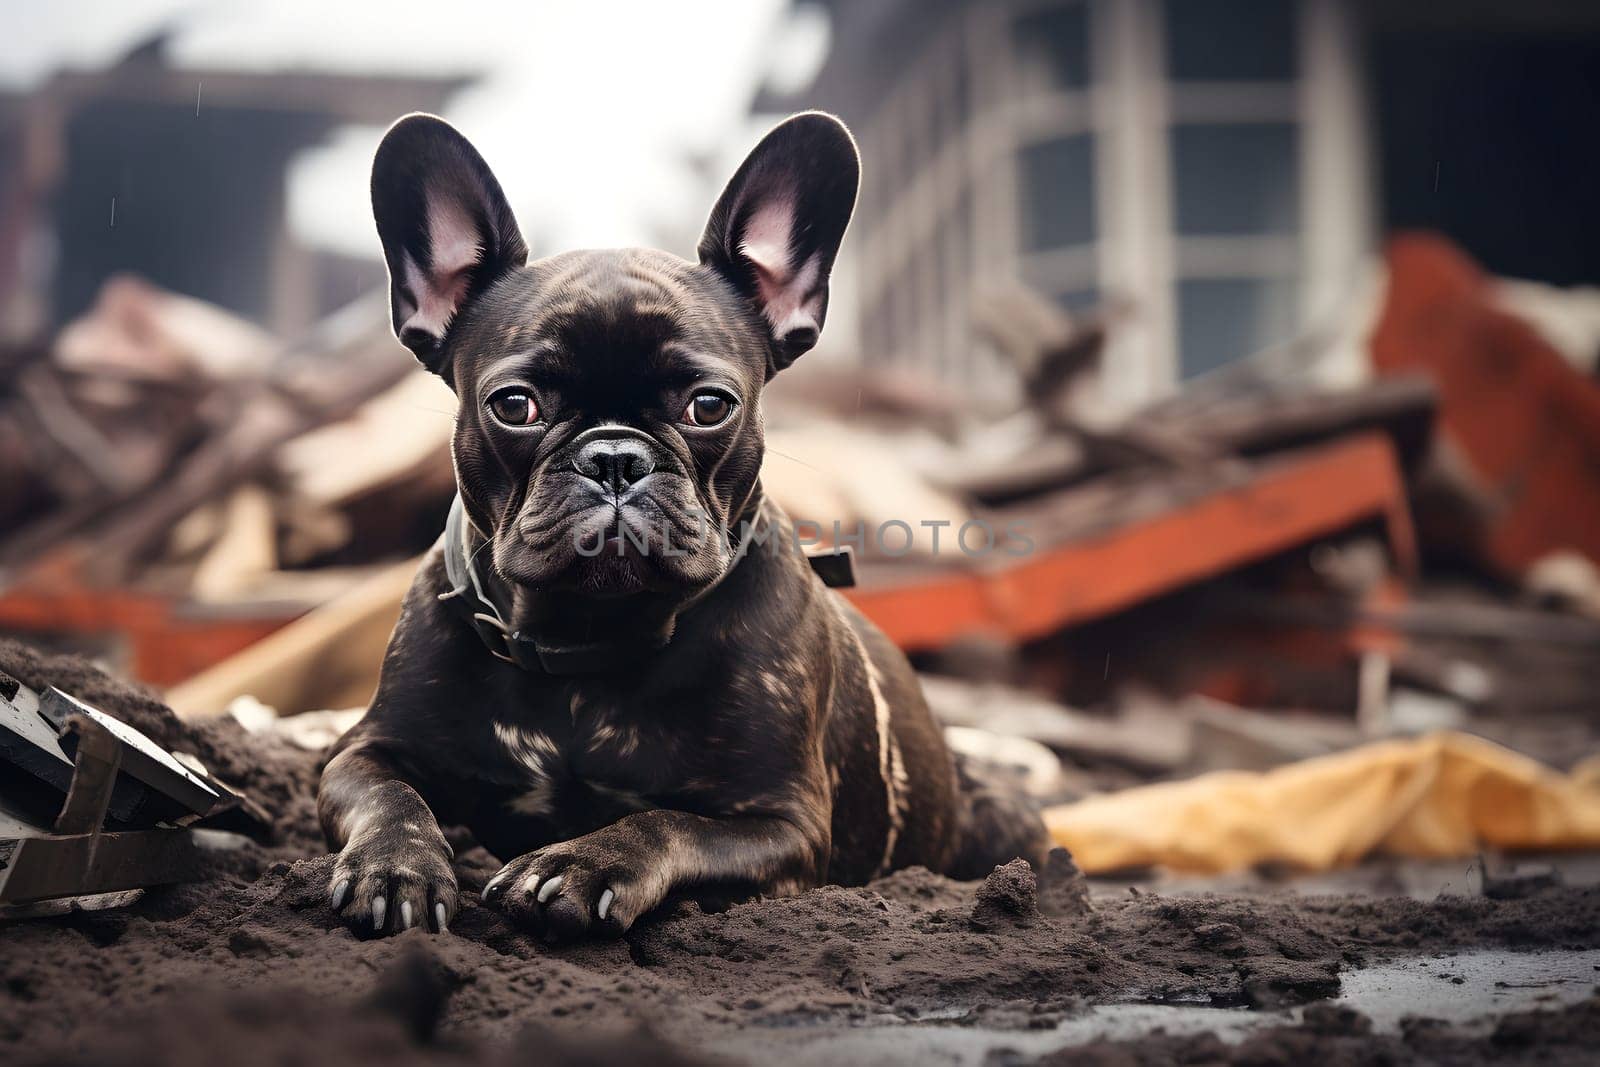 Alone and hungry French Bulldog after disaster on the background of house rubble. Neural network generated image. Not based on any actual scene.